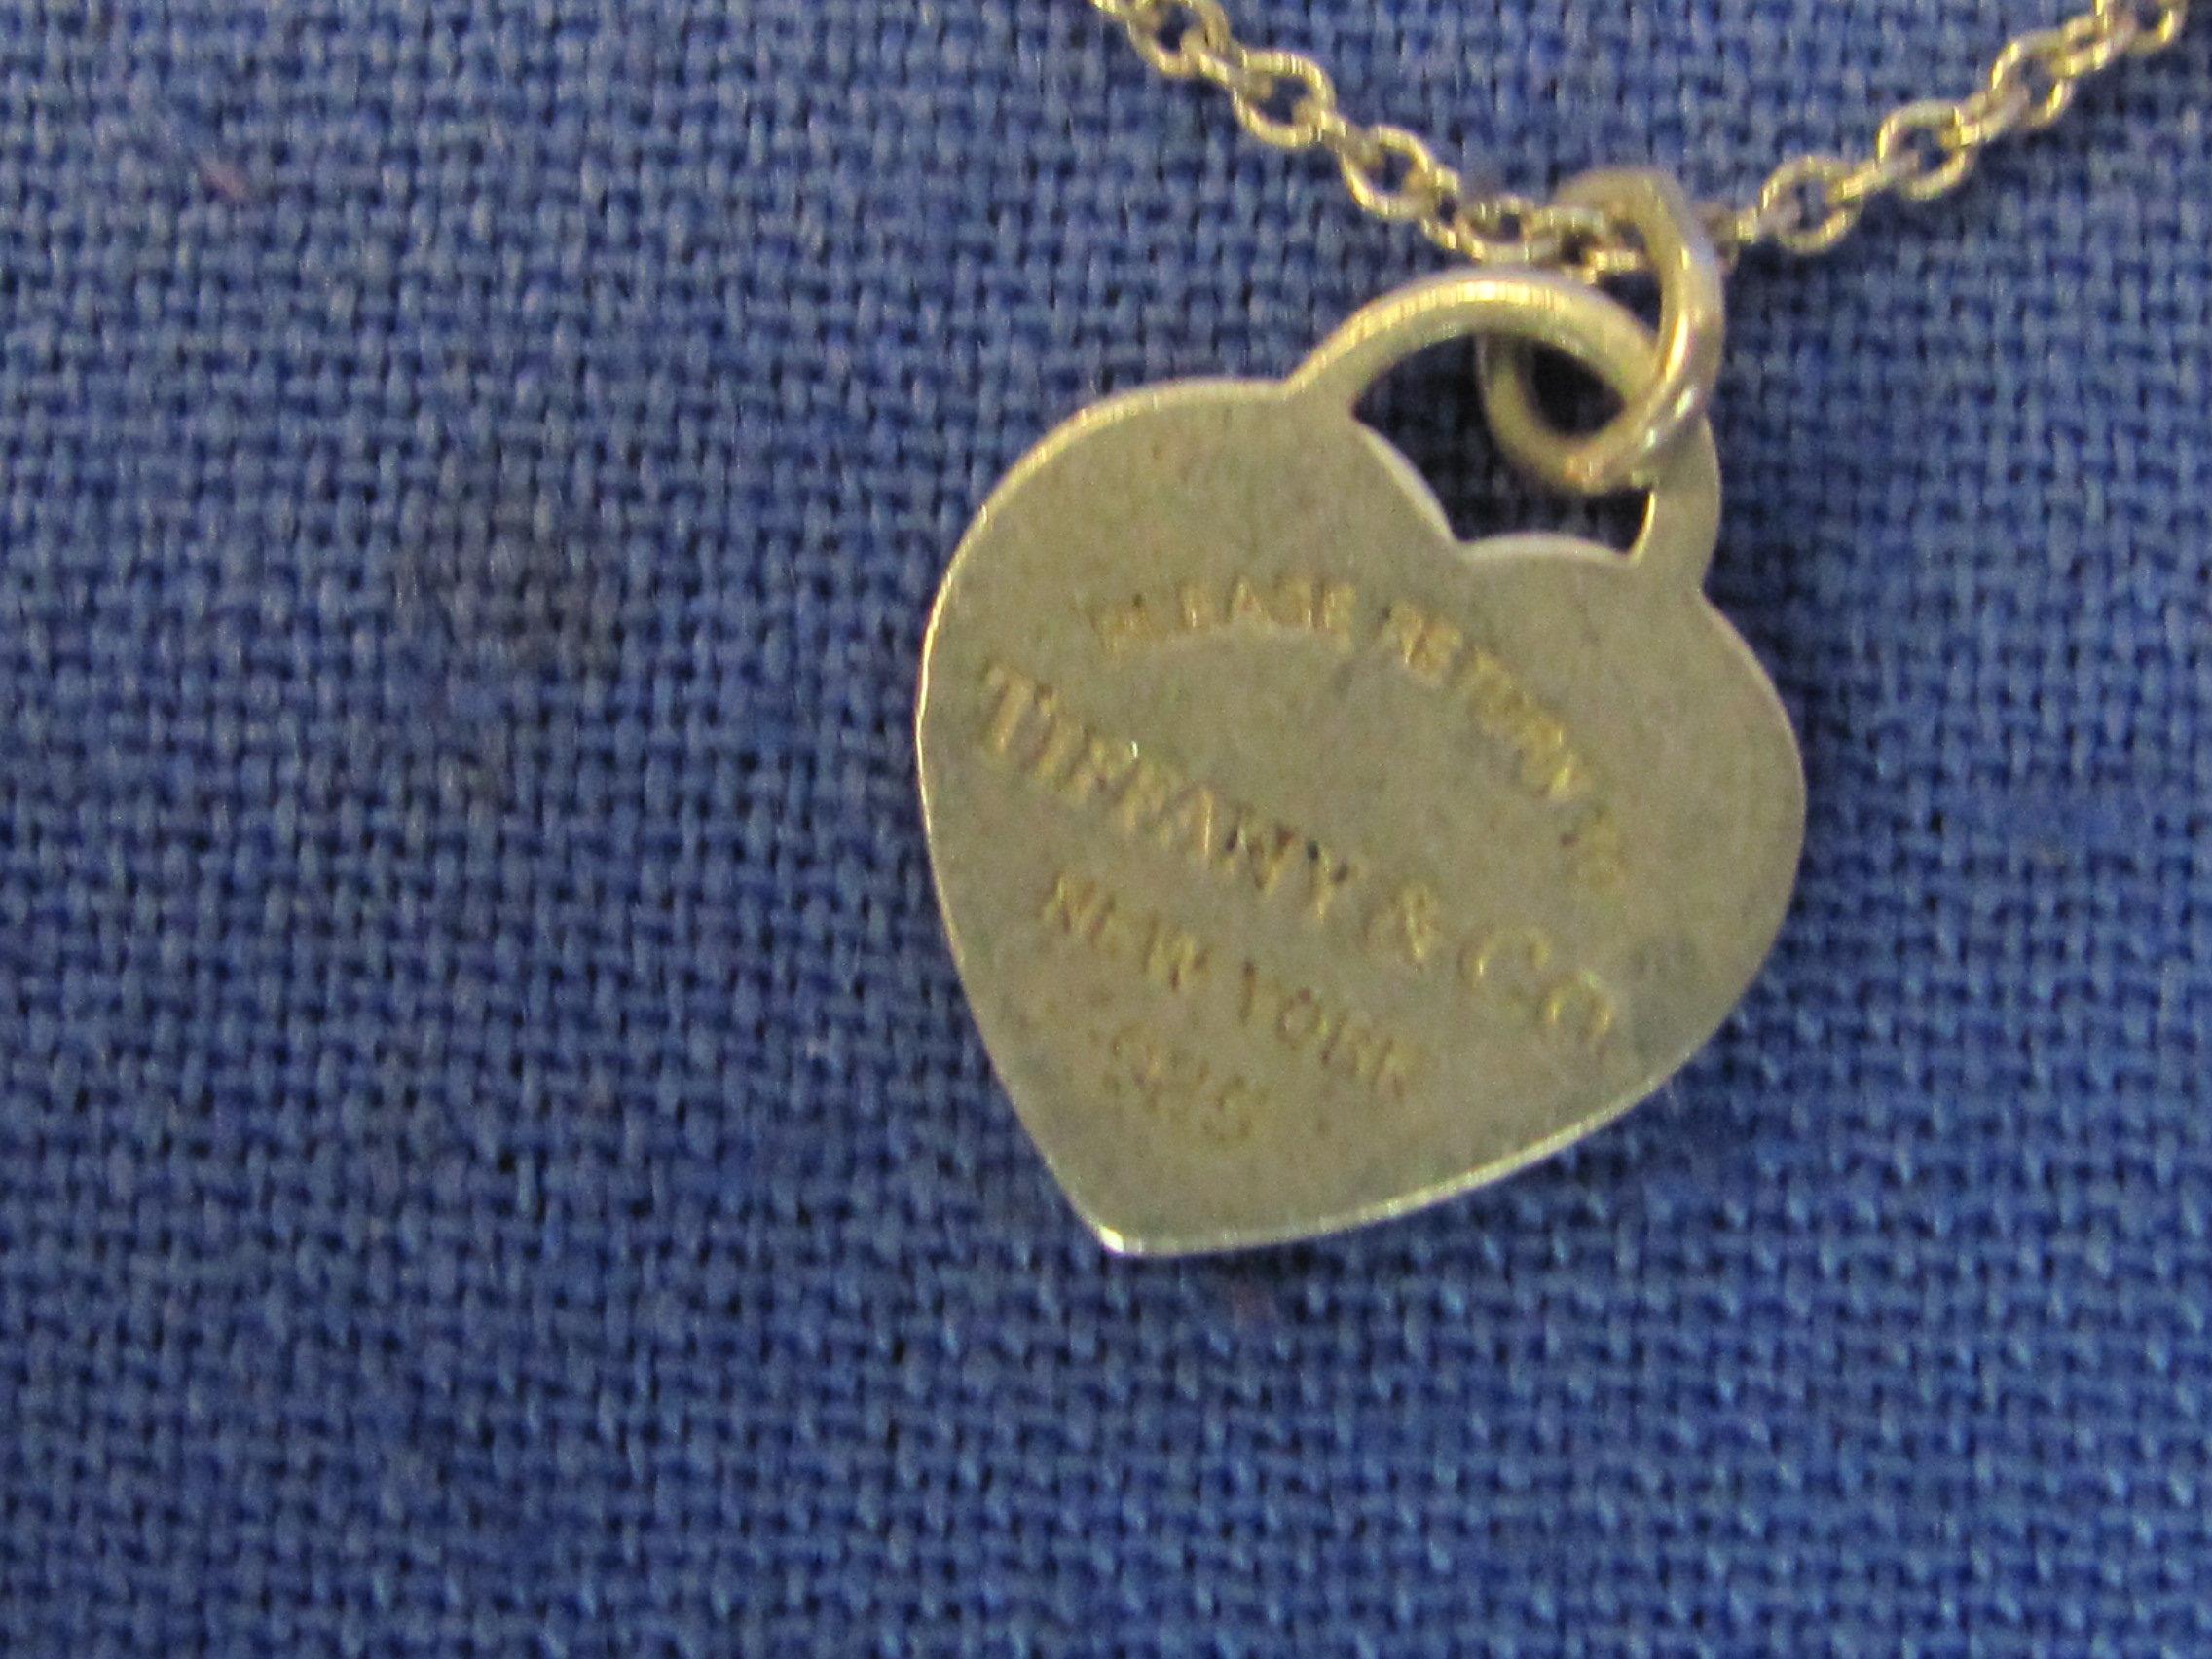 Tiffany & Co. Heart Charms on 16” Sterling Chain – Hearts about 1/2” - Weight is 2.7 grams